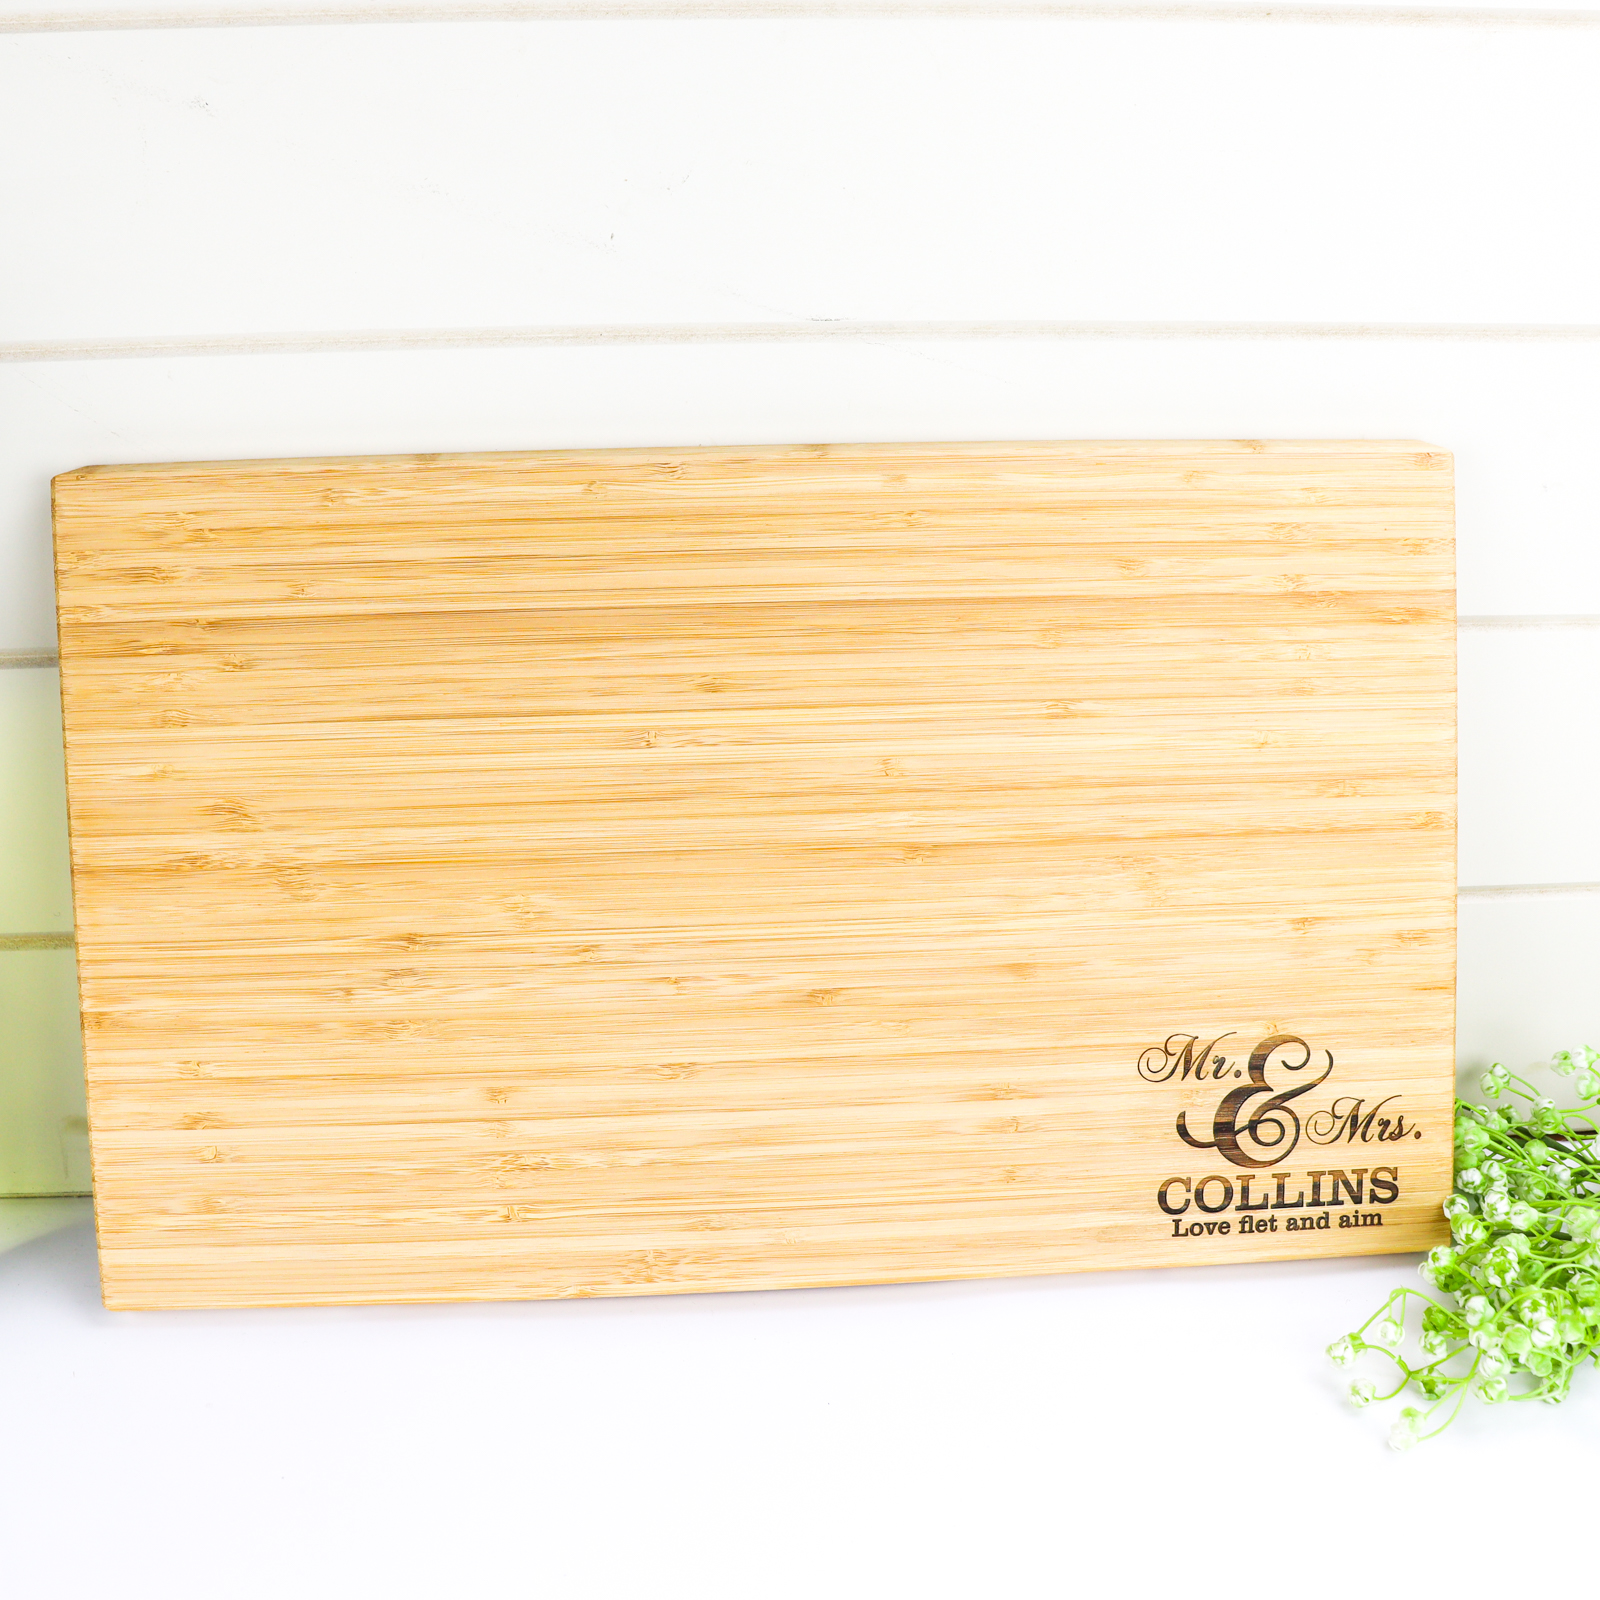 Couples personalised chopping board